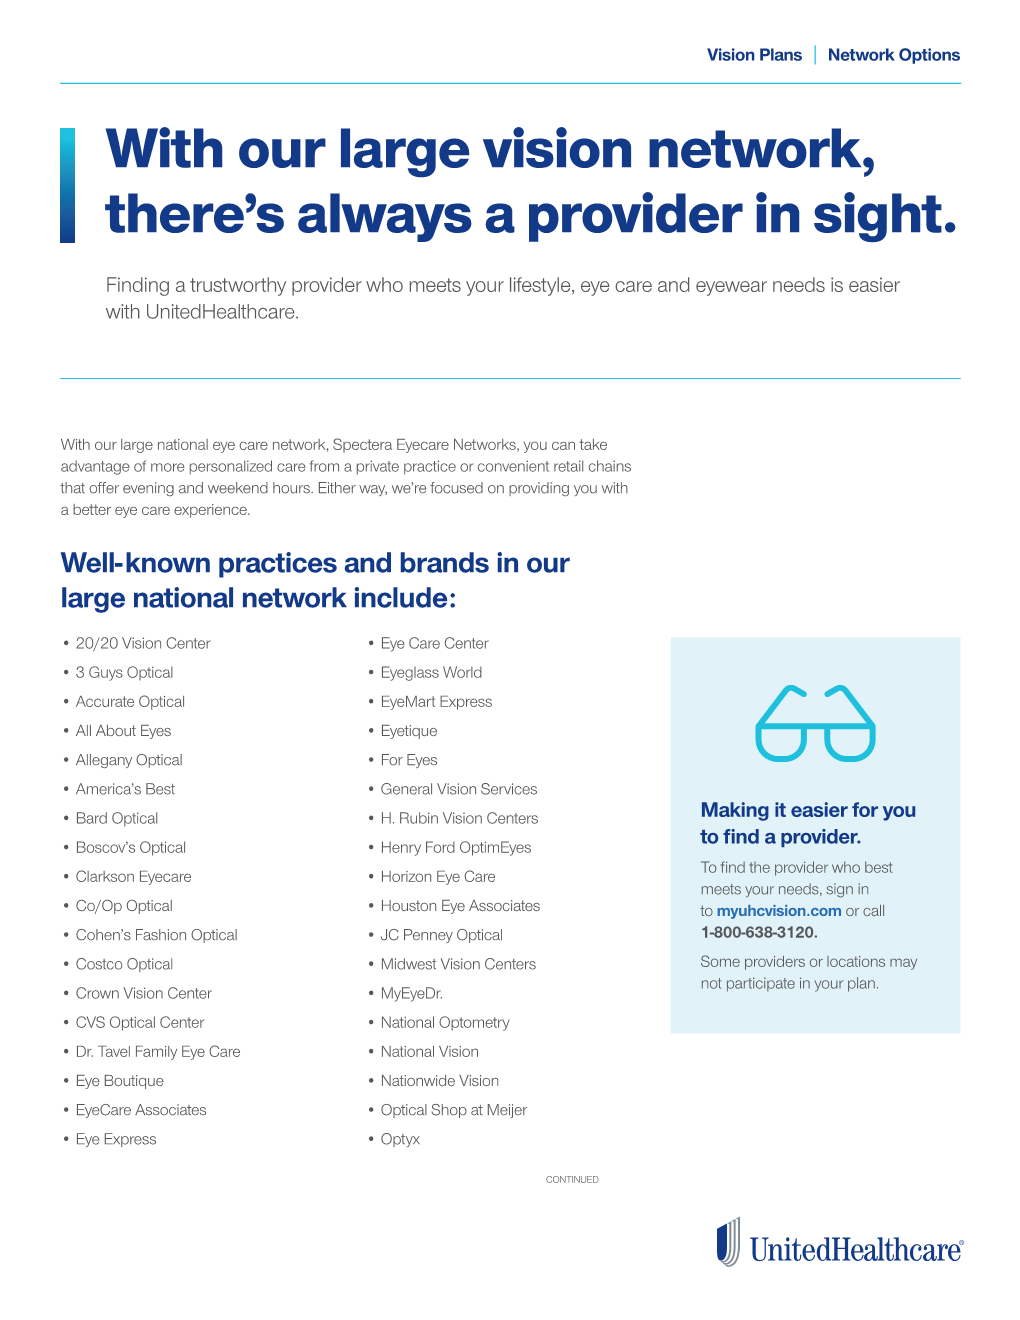 With Our Large Vision Network, There's Always a Provider in Sight